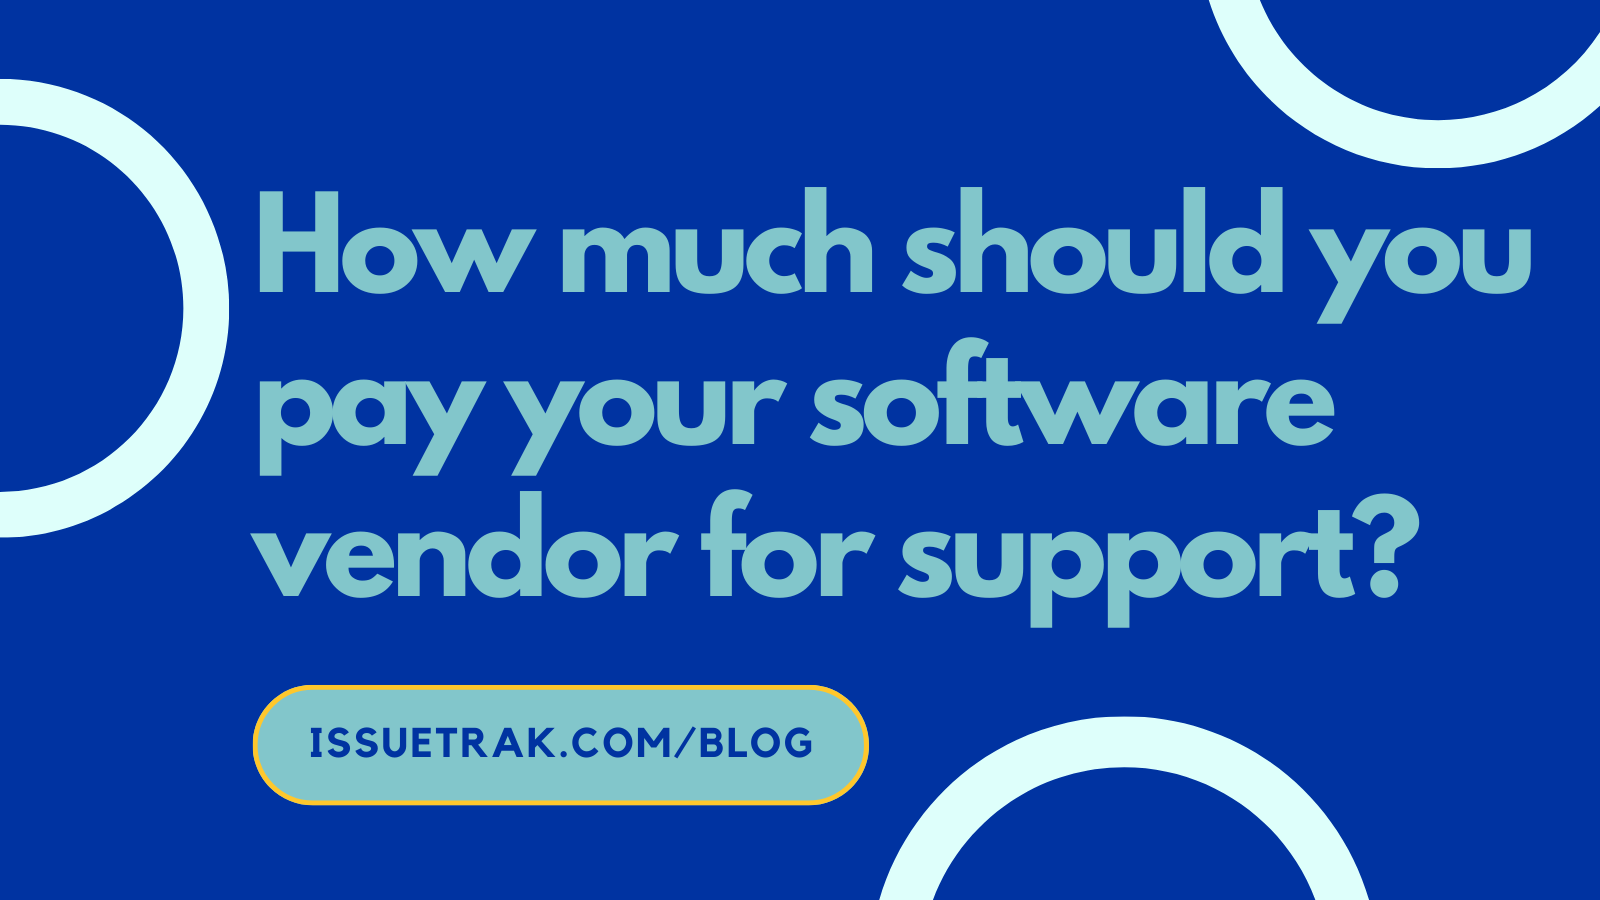 Issuetrak, Zendesk, Jira: How Much Should You Pay for Support?